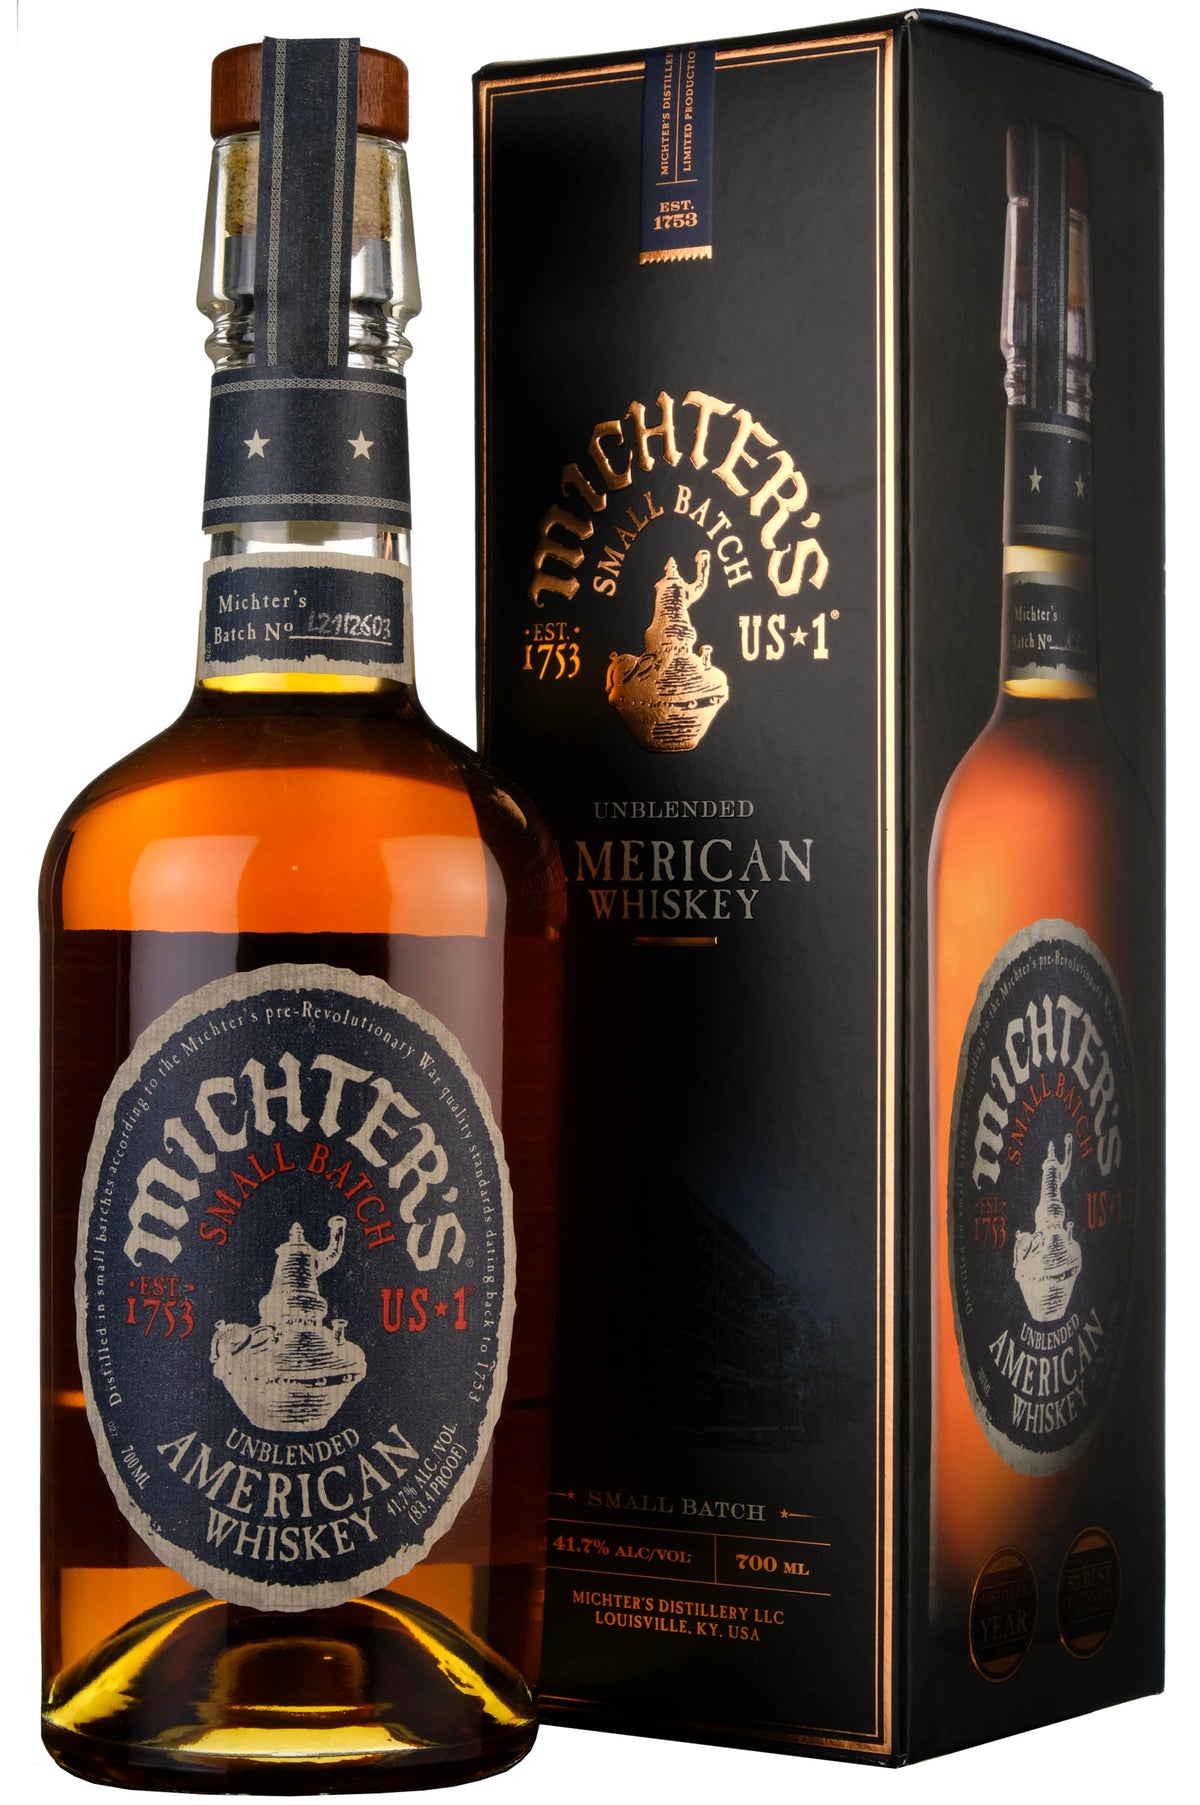 Michter's US*1 Unblended American Whiskey Small Batch Bottled 2021